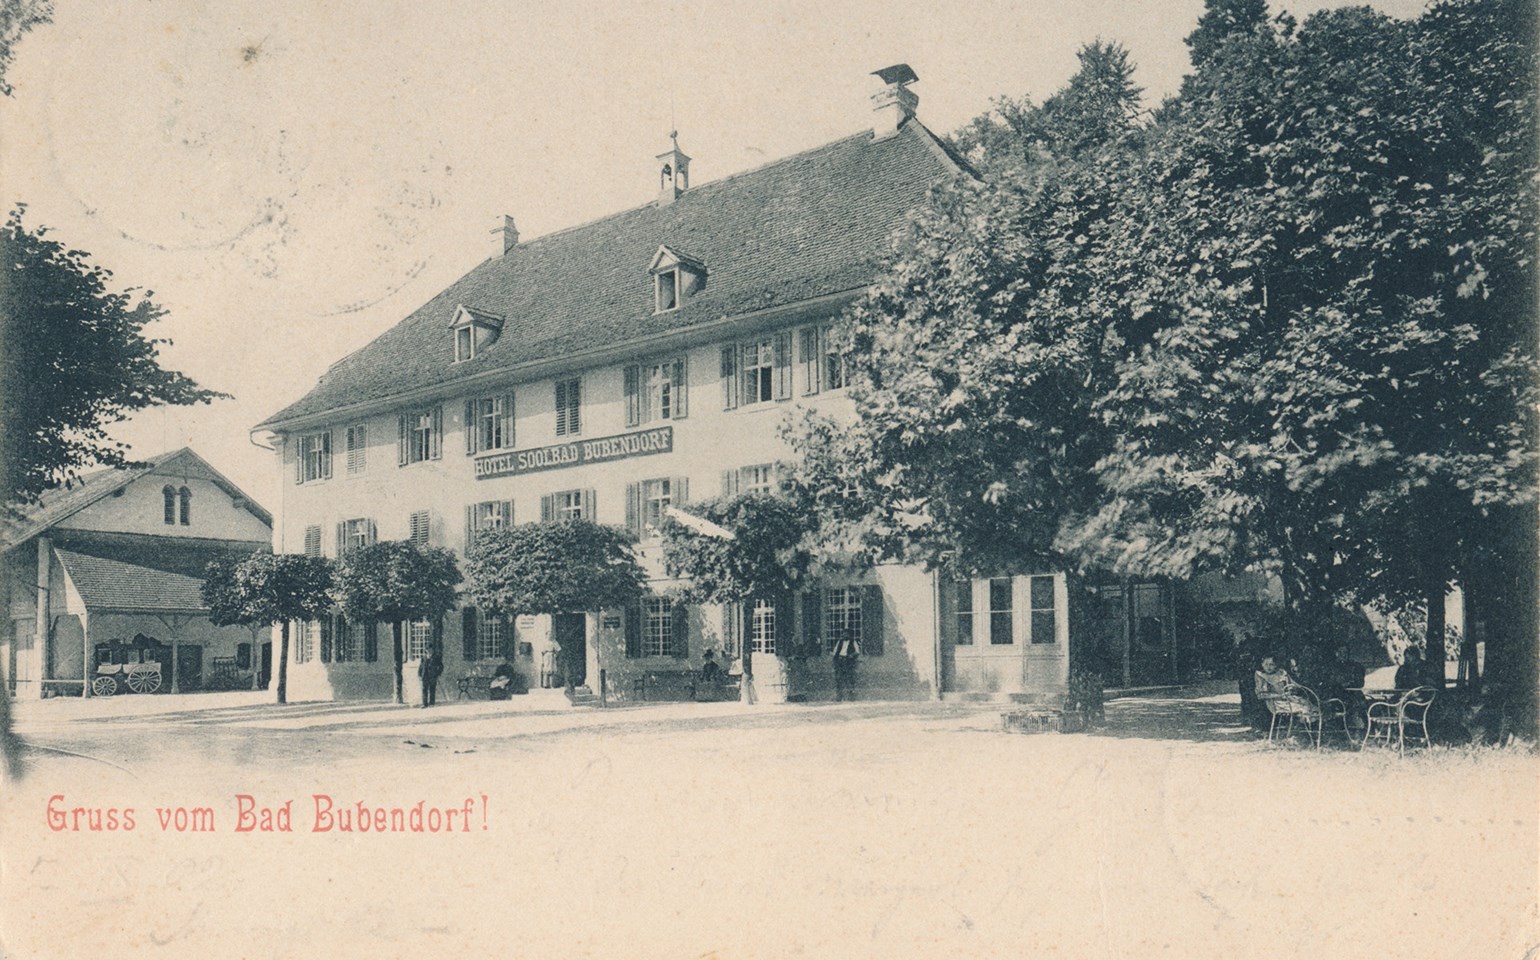 The Bad Bubendorf Hotel in earlier times